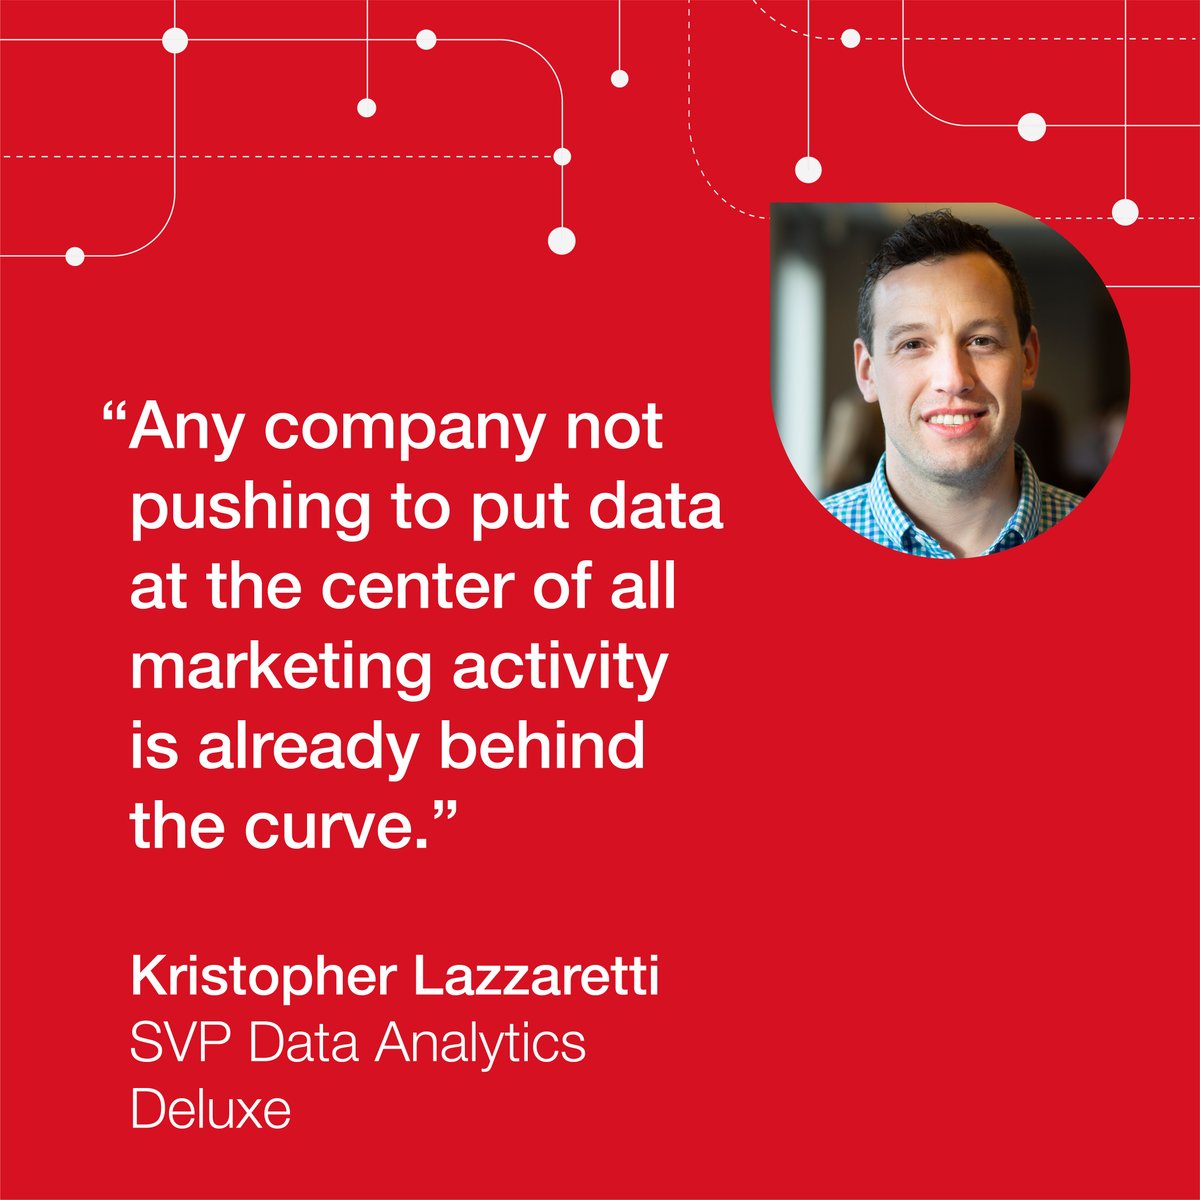 Kris Lazzaretti, President of Data Solutions at Deluxe, warns that companies not invested in data-driven marketing could lose their competitive edge. Explore the numbers on financial marketing personalization here: bit.ly/3PJlW22